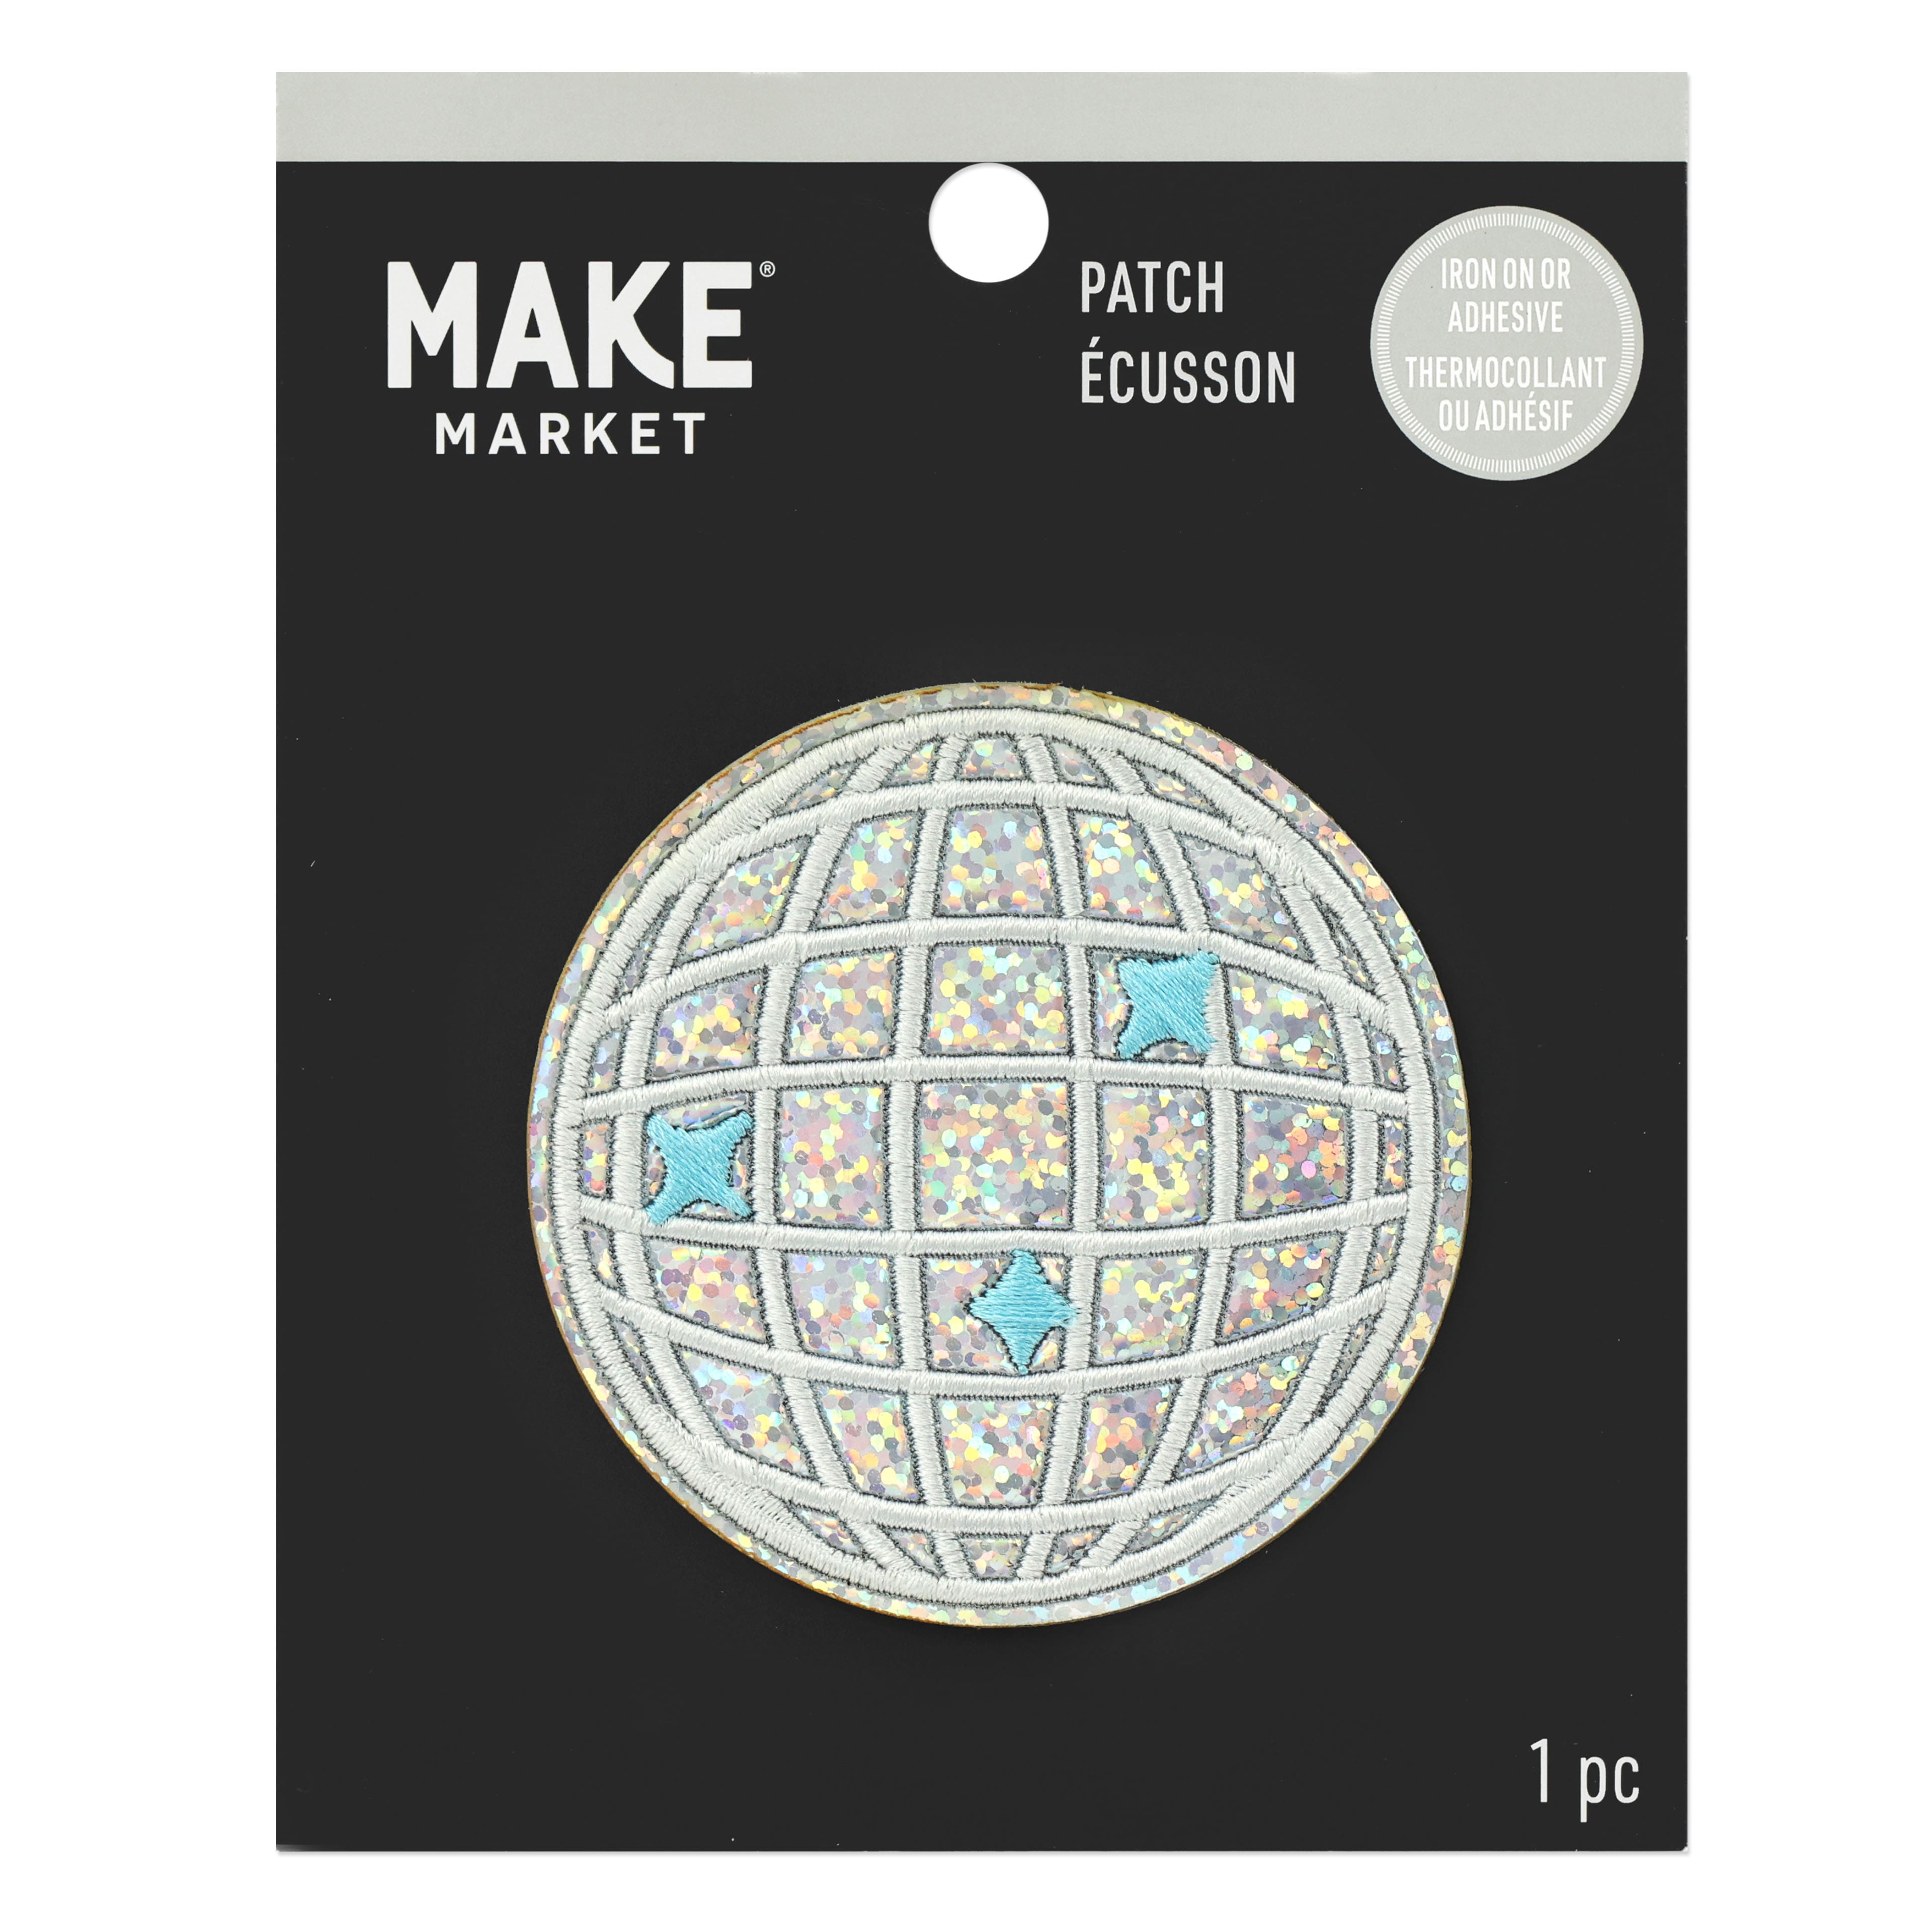 Iron-On &#x26; Adhesive Disco Ball Embroidered Patch by Make Market&#xAE;